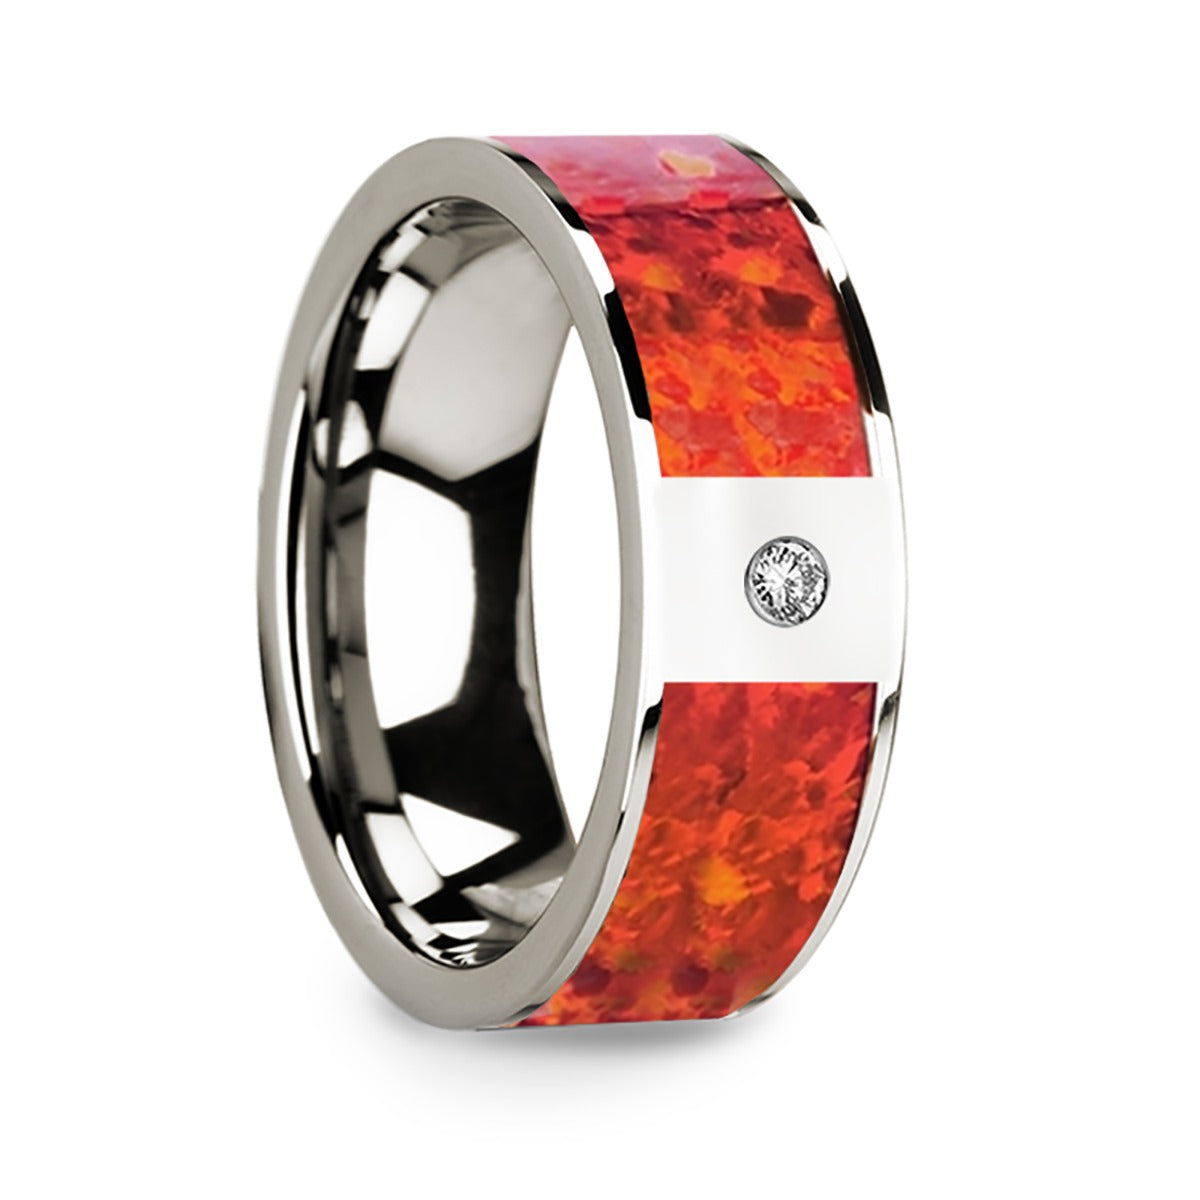 14k White Gold Men's Wedding Band with Red Opal Inlay & Diamond